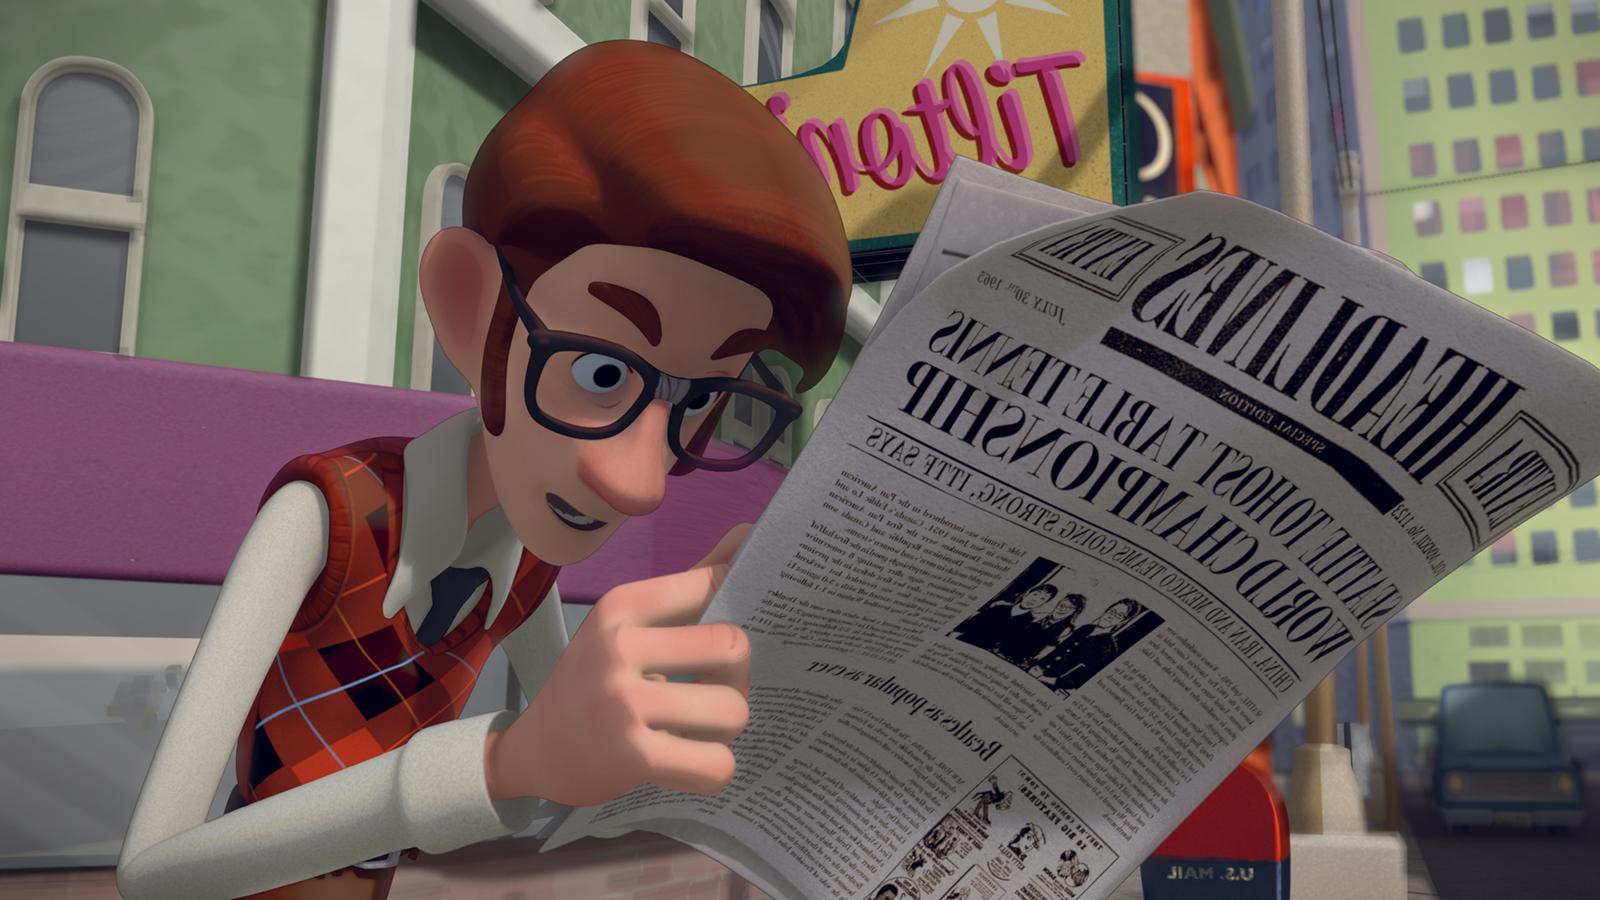 A man in glasses and a red argyle sweater sits on a bench reading a newspaper, fascinated by a story.